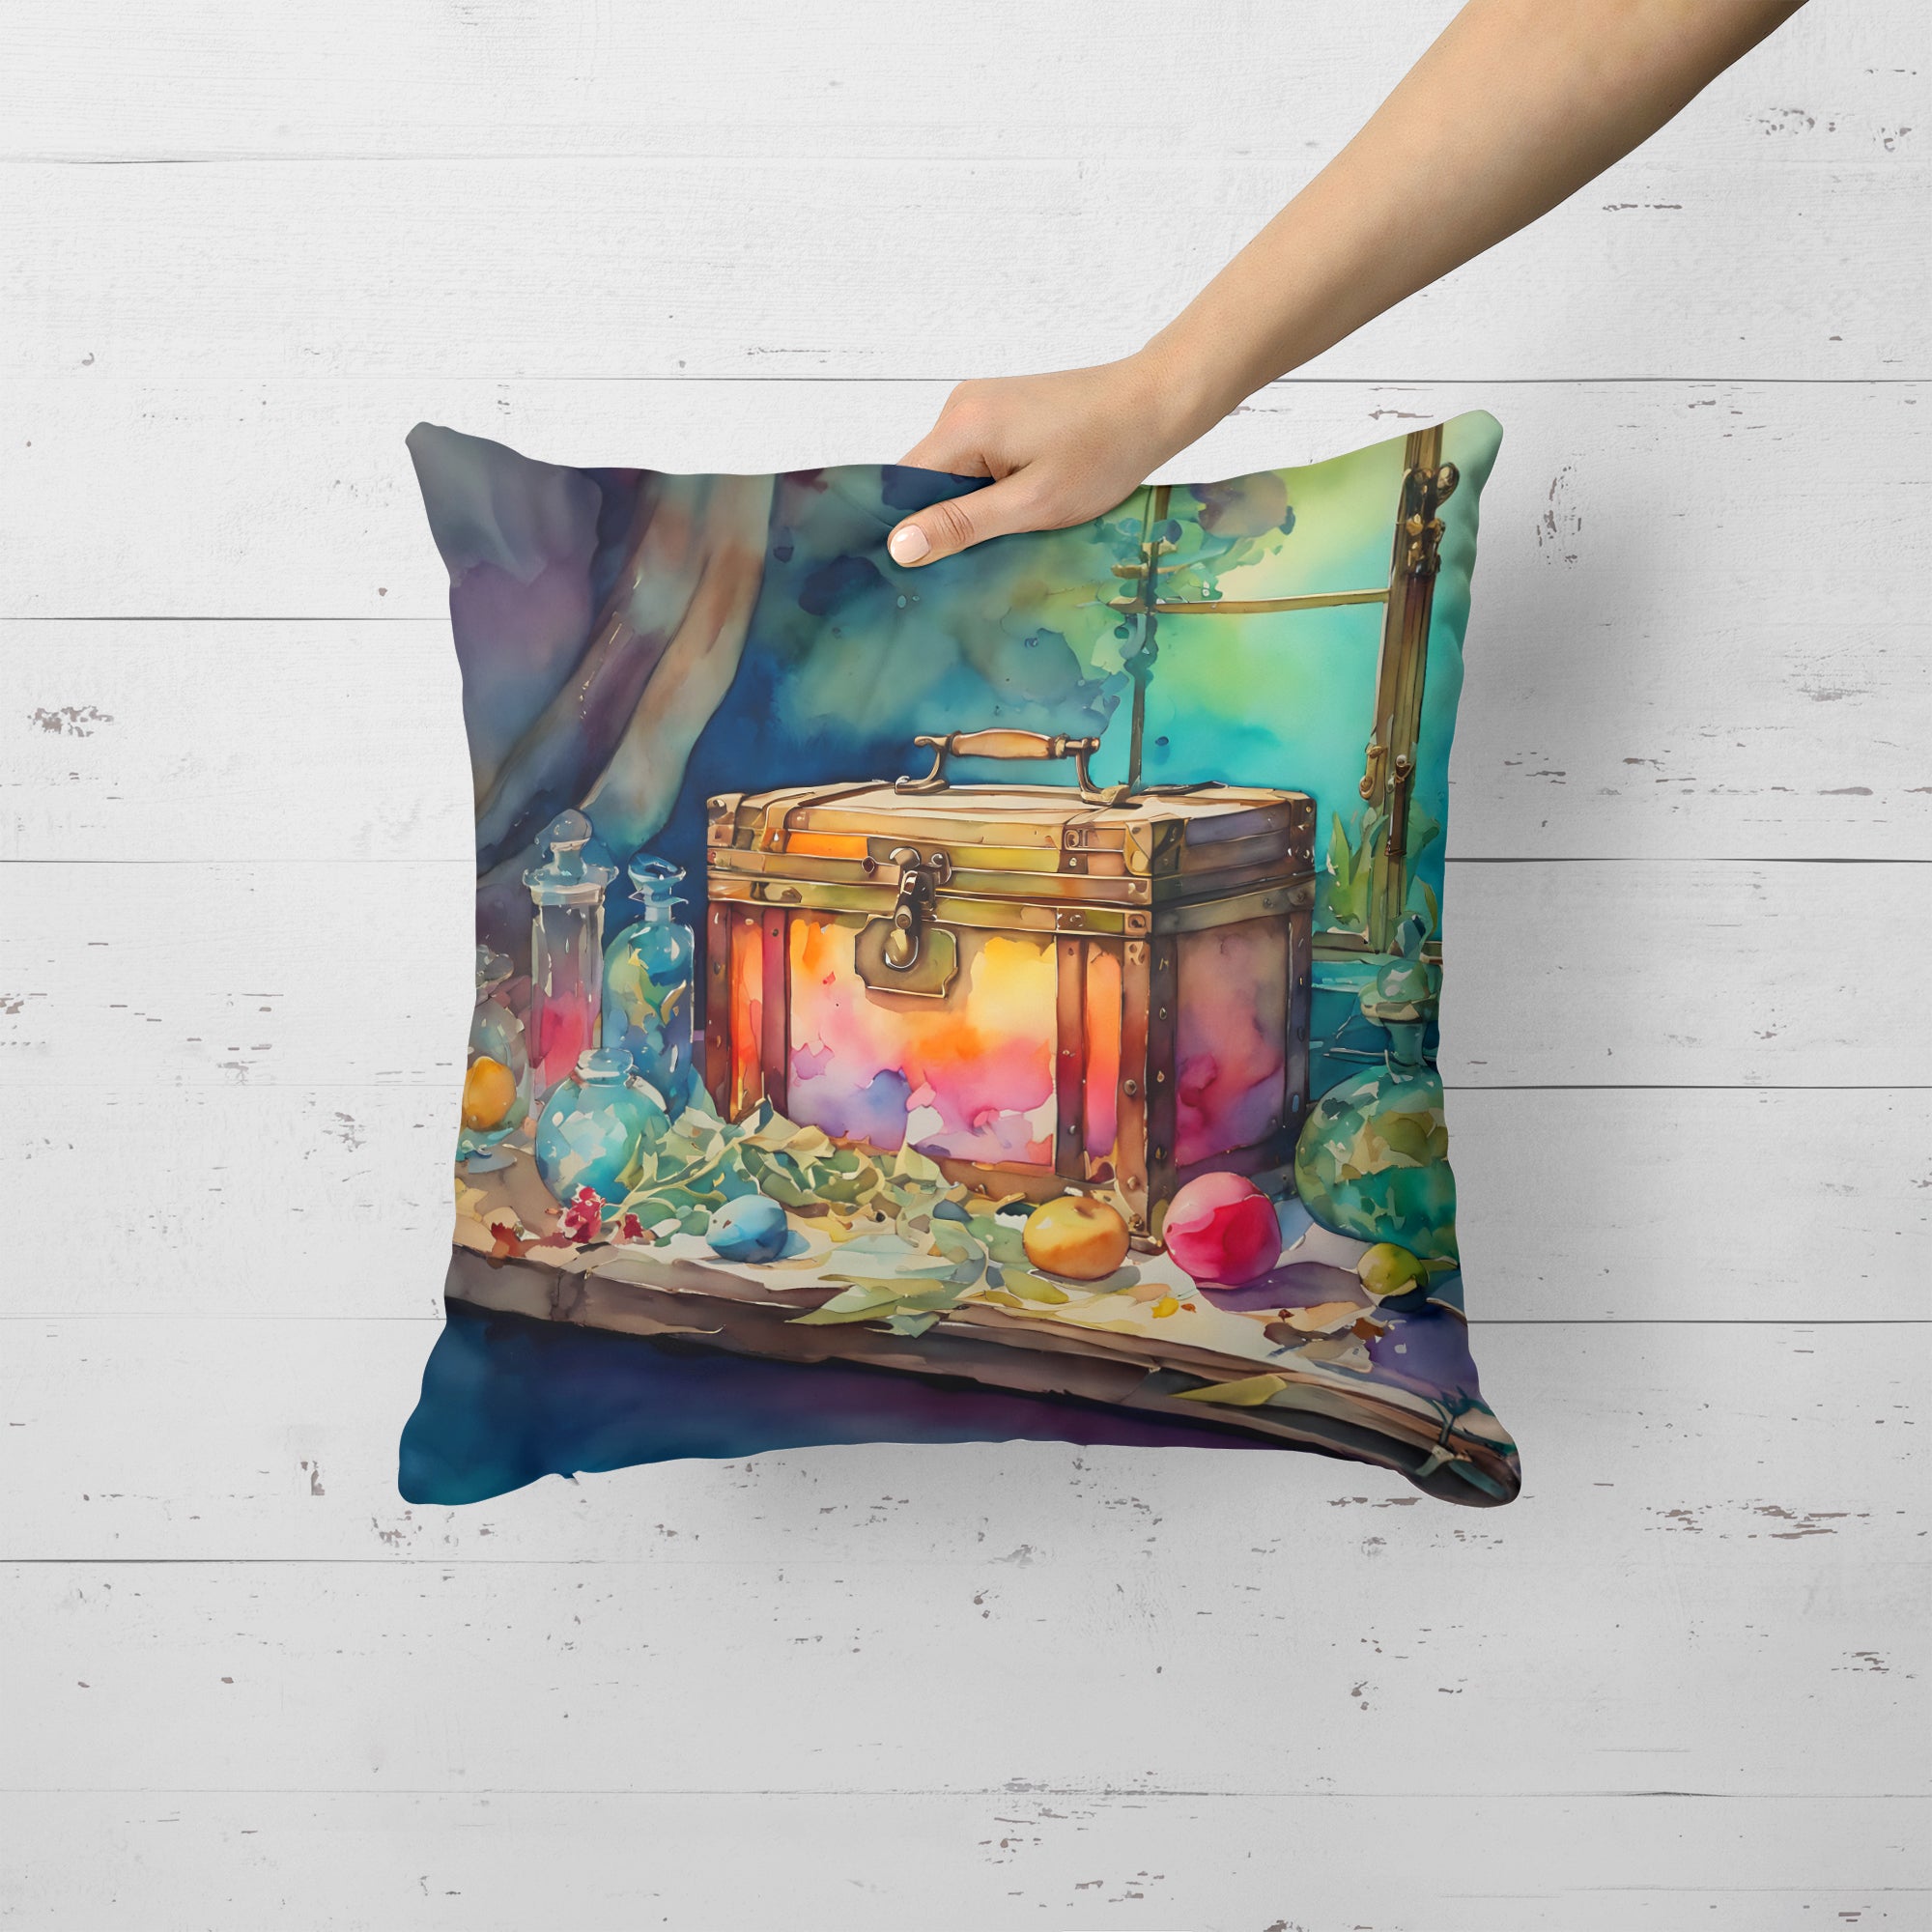 Buy this Treasure Chest Throw Pillow